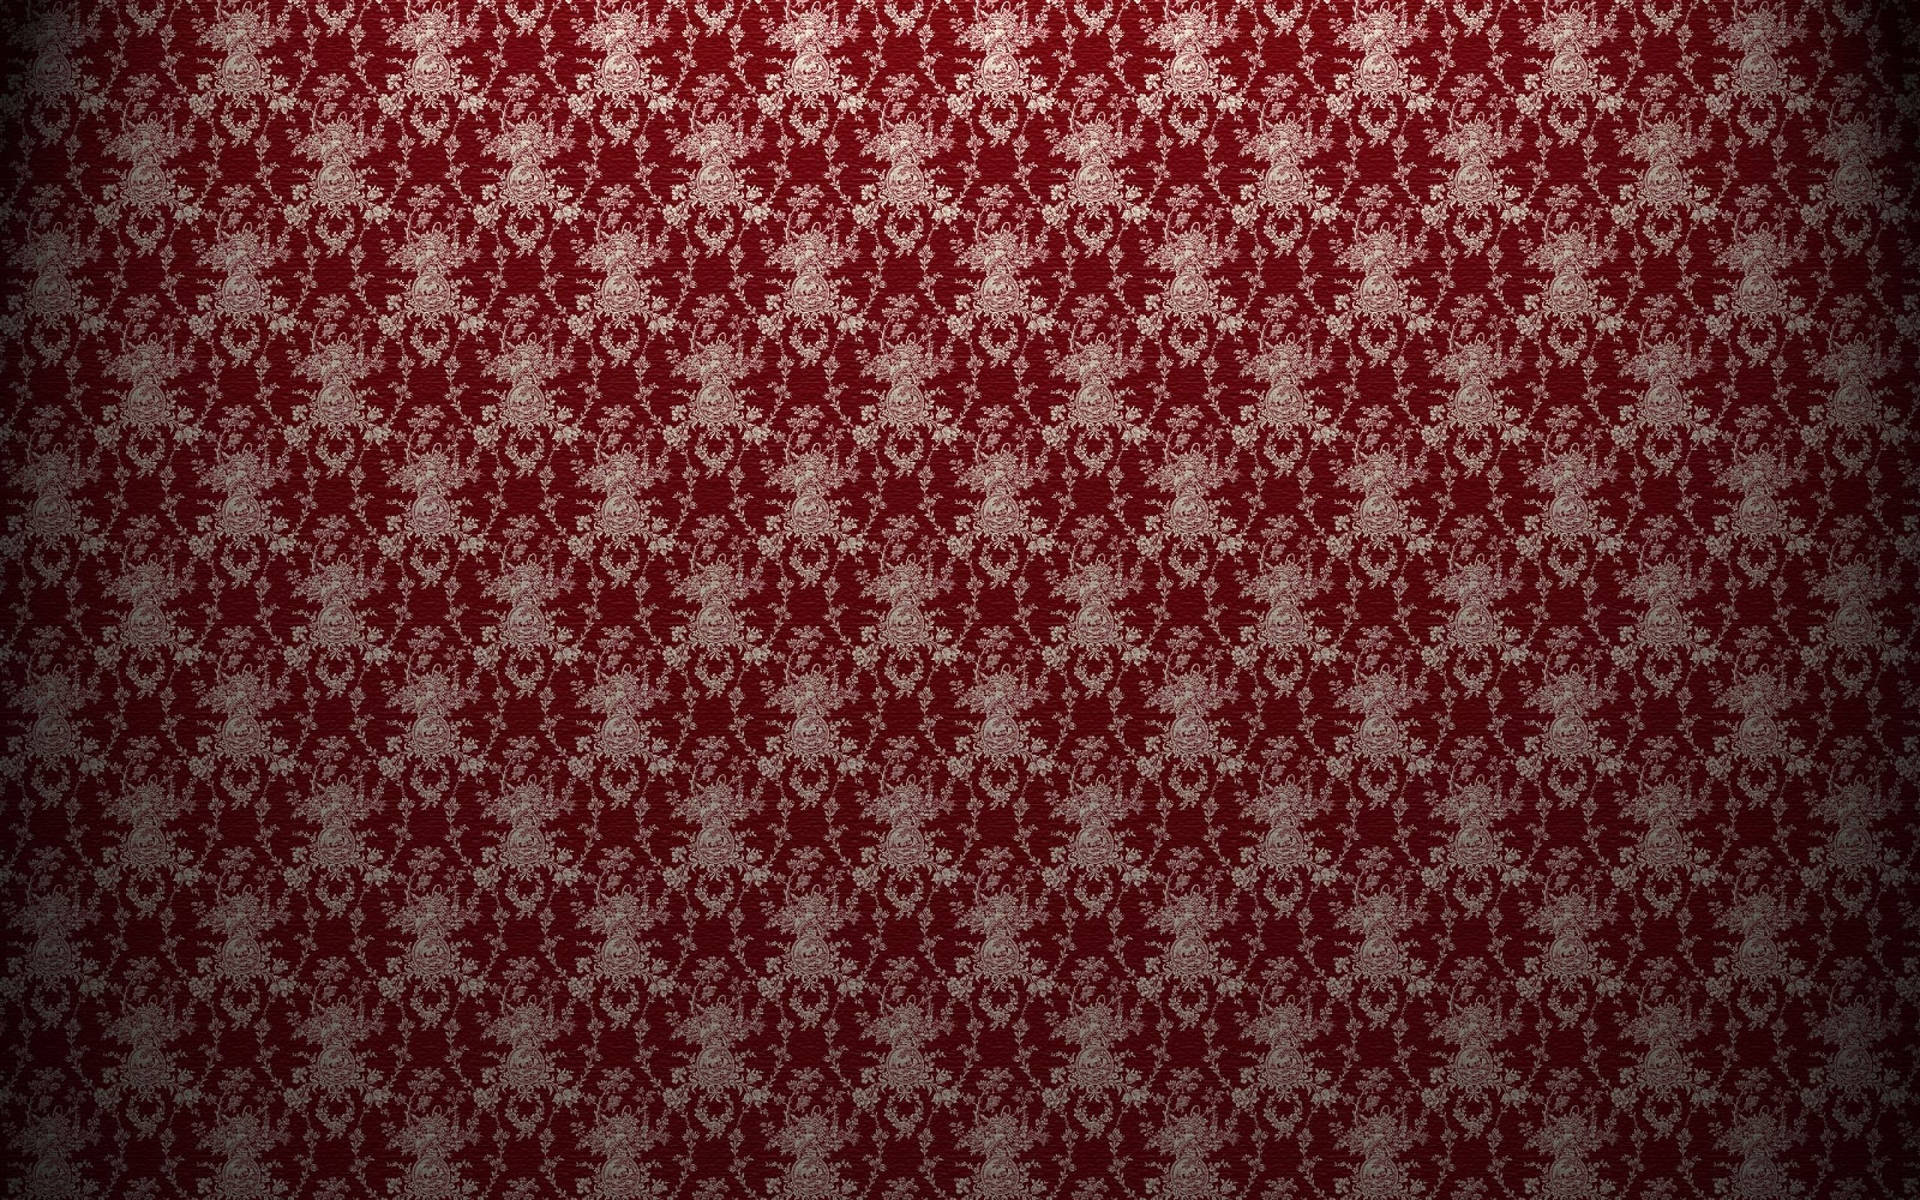 Feel the vintage vibe with this classic red pattern Wallpaper